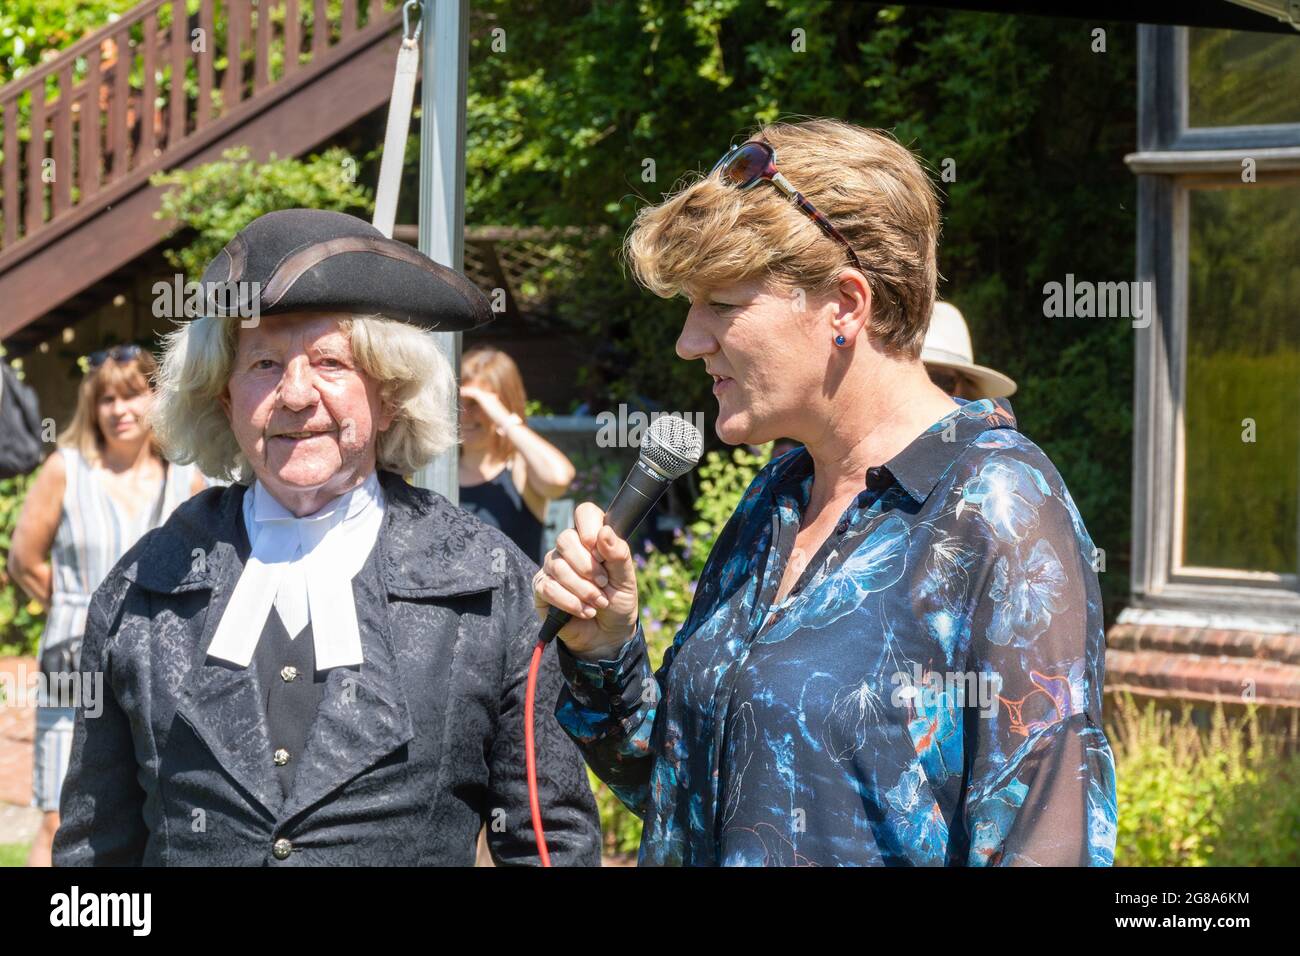 July 18th, 2021. Presenter Clare Balding wishing a Gilbert White lookalike Happy Birthday at the 301st Birthday Party event for the famous naturalist in the garden of the Gilbert White House and Museum in Selborne, Hamphire, England, UK. This event had been delayed a year due to the covid-19 pandemic. Stock Photo